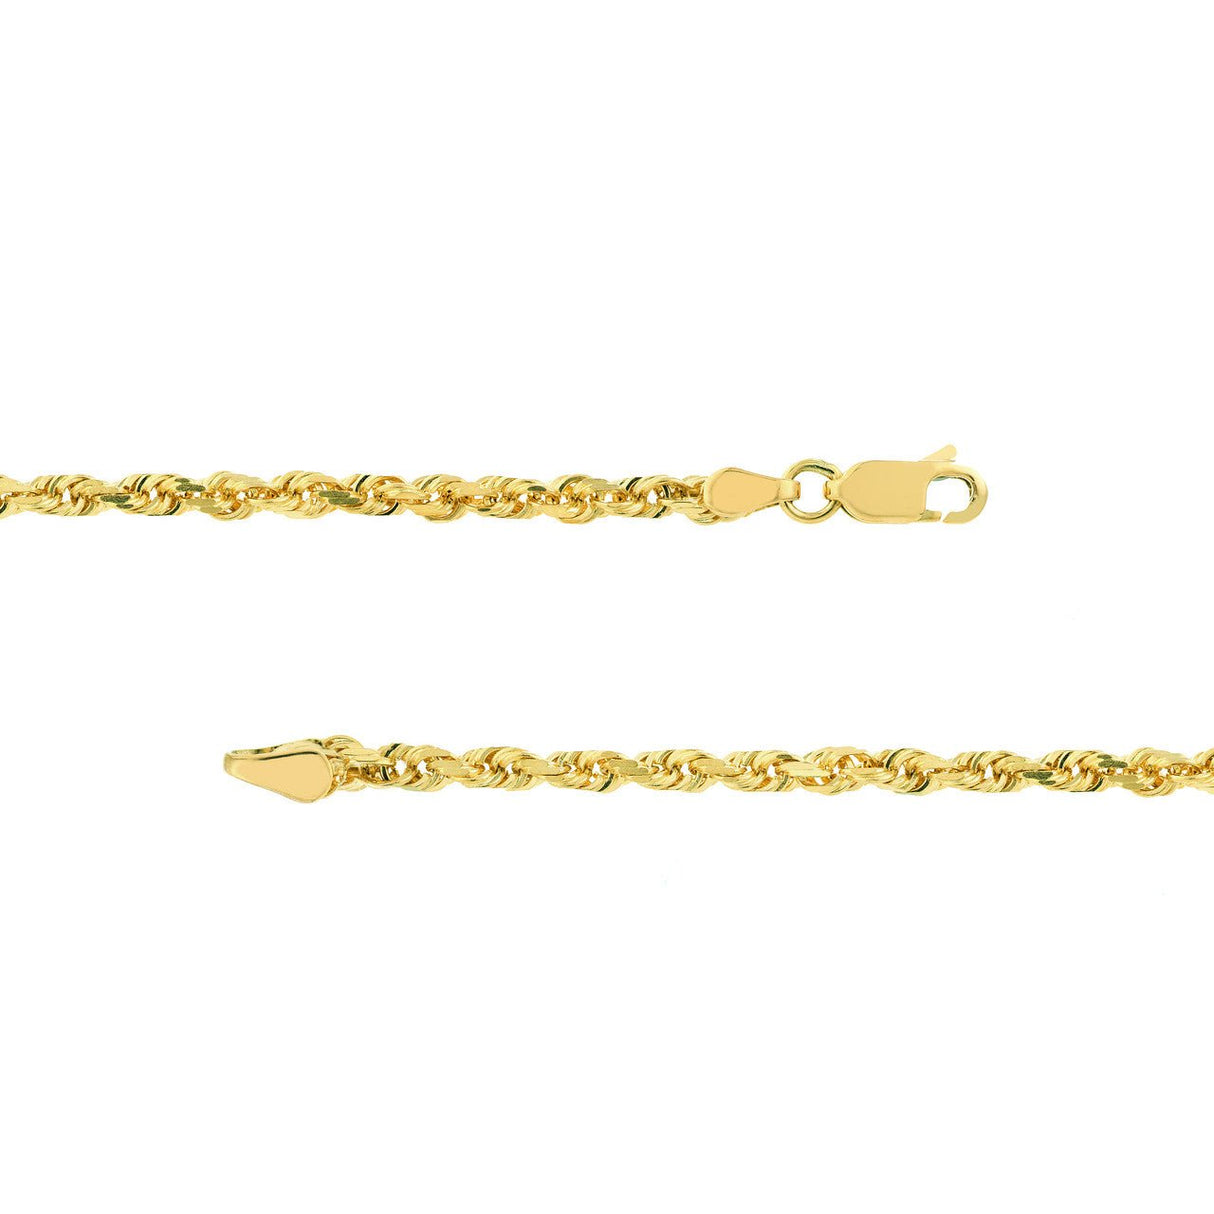 Close up image of the 14K Gold Chain, highlighting the unique 3mm Double-Cut Rope Chain design from the 2023 collection, compare us with  zales, compere us with oradina, clean origin of gold, diamond  origin, gold necklaces, gold rope chain,